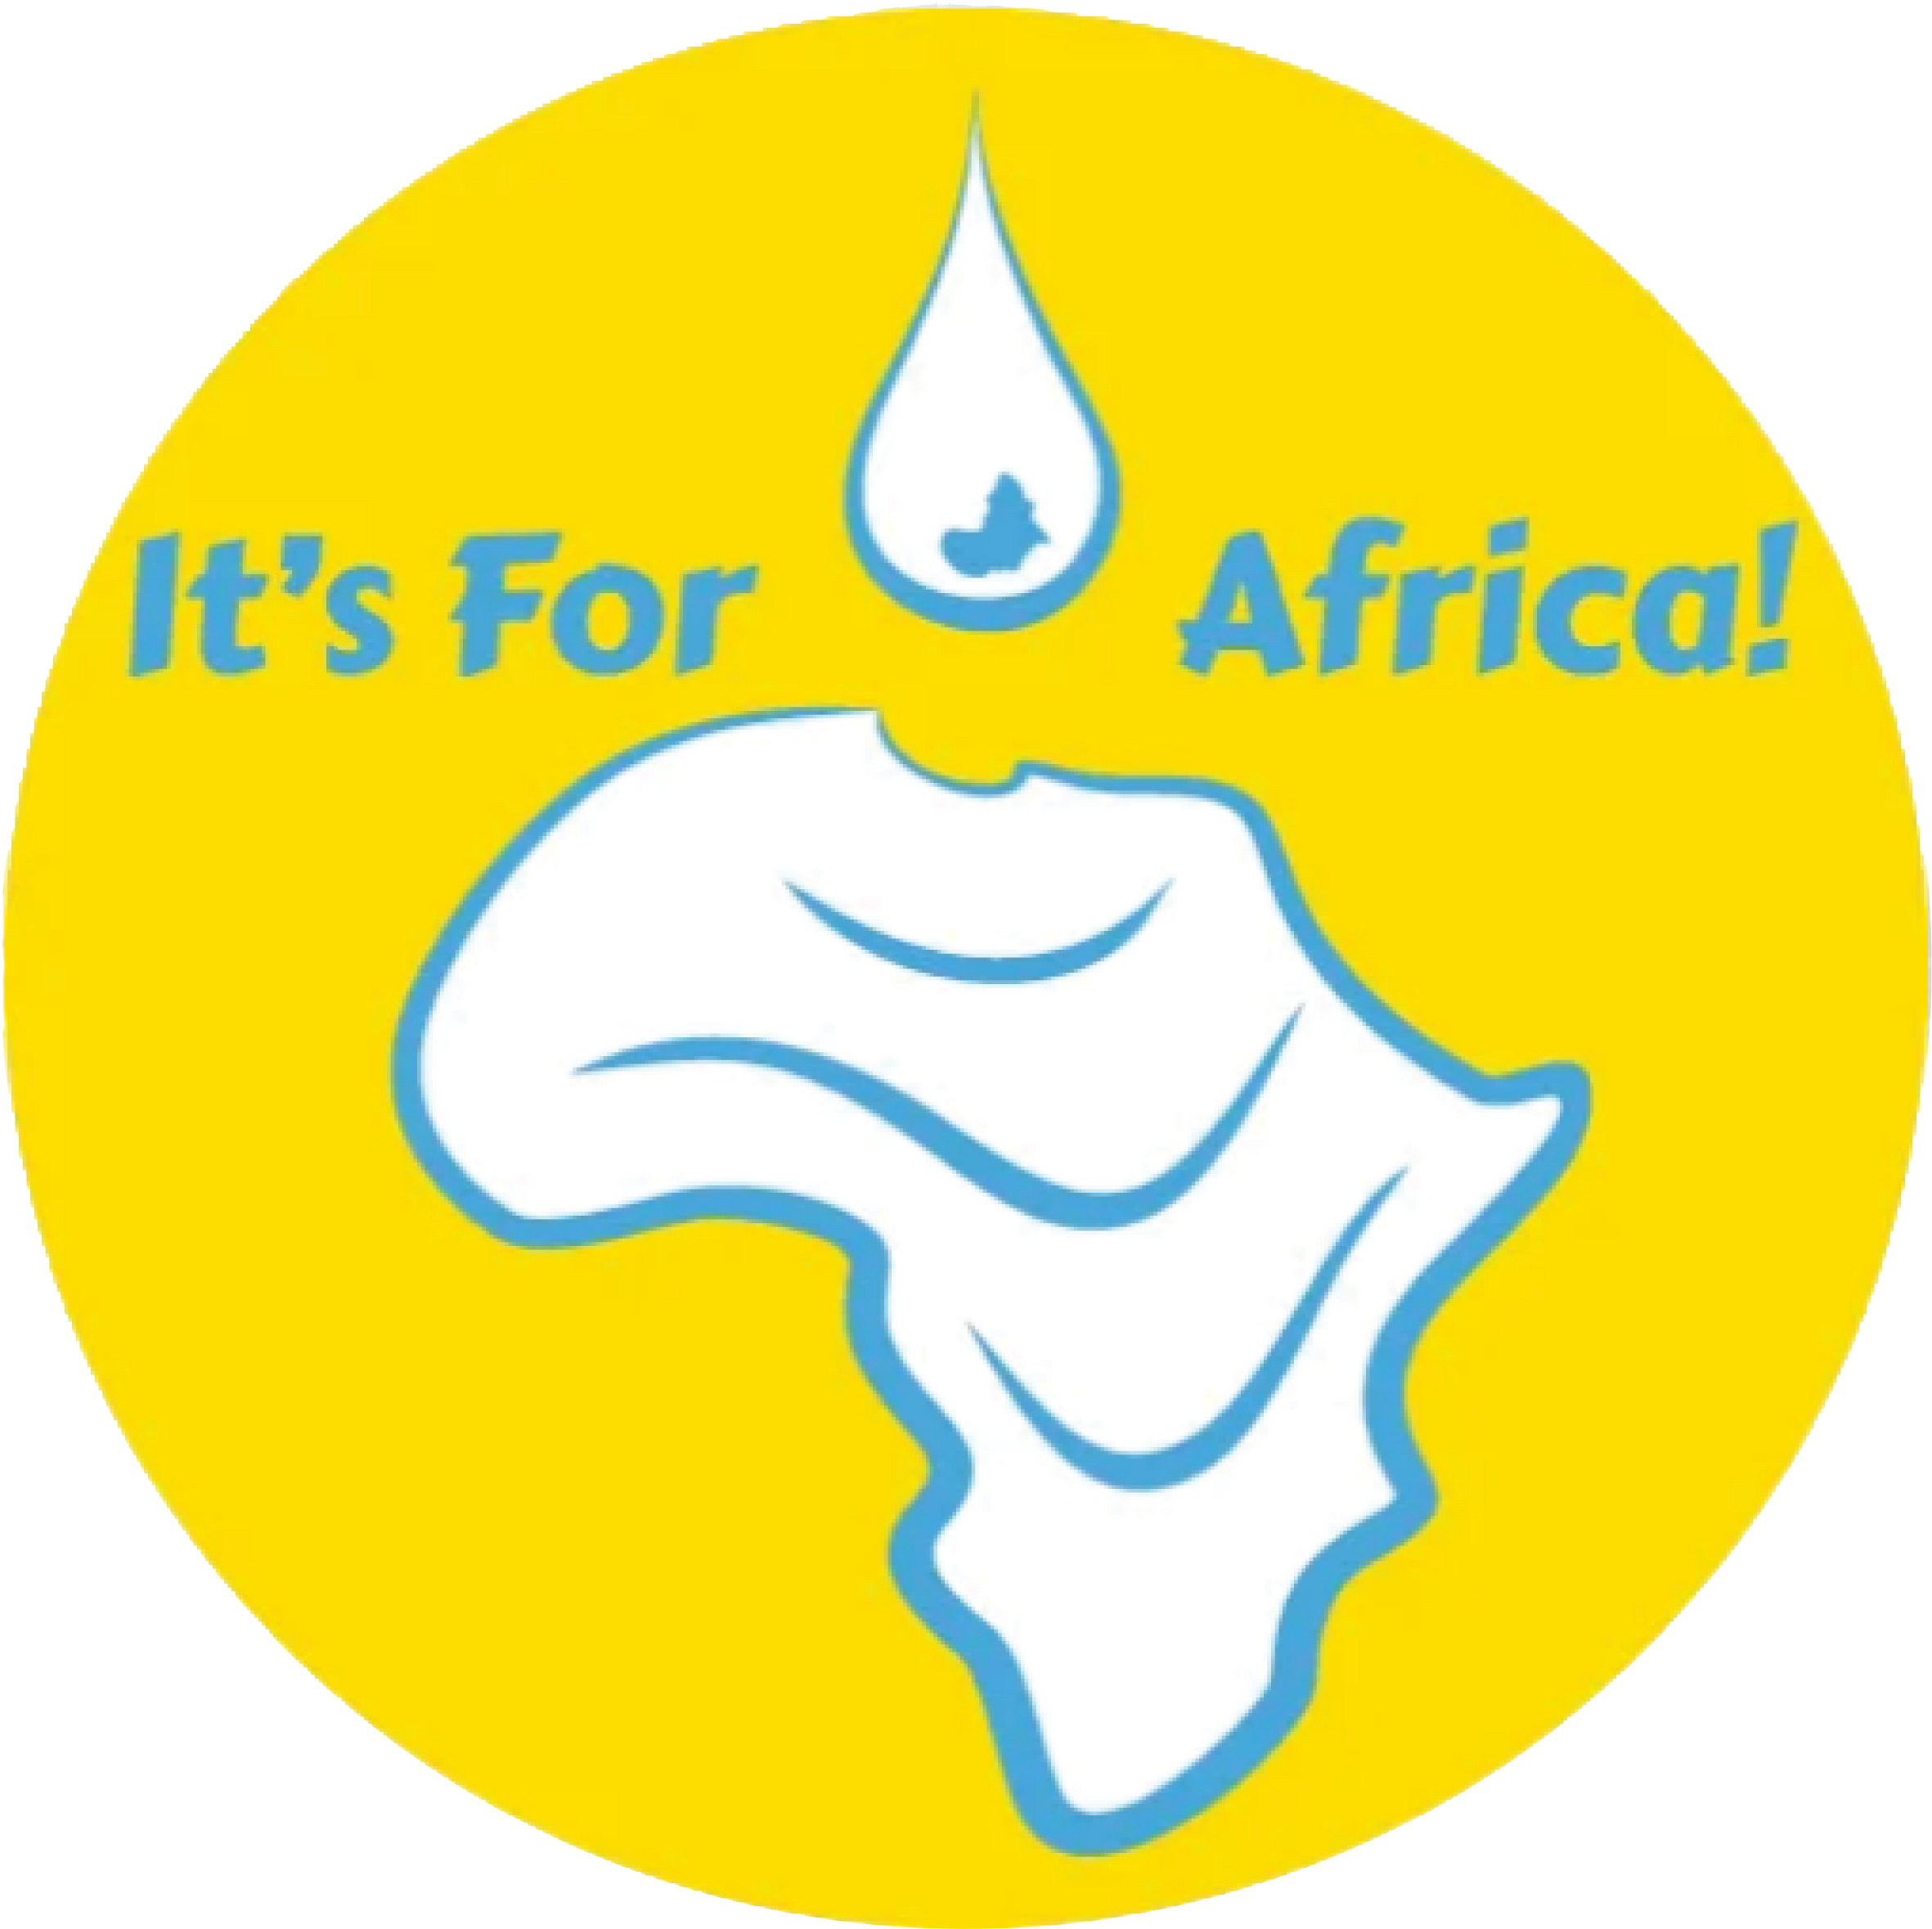 It's For Africa!